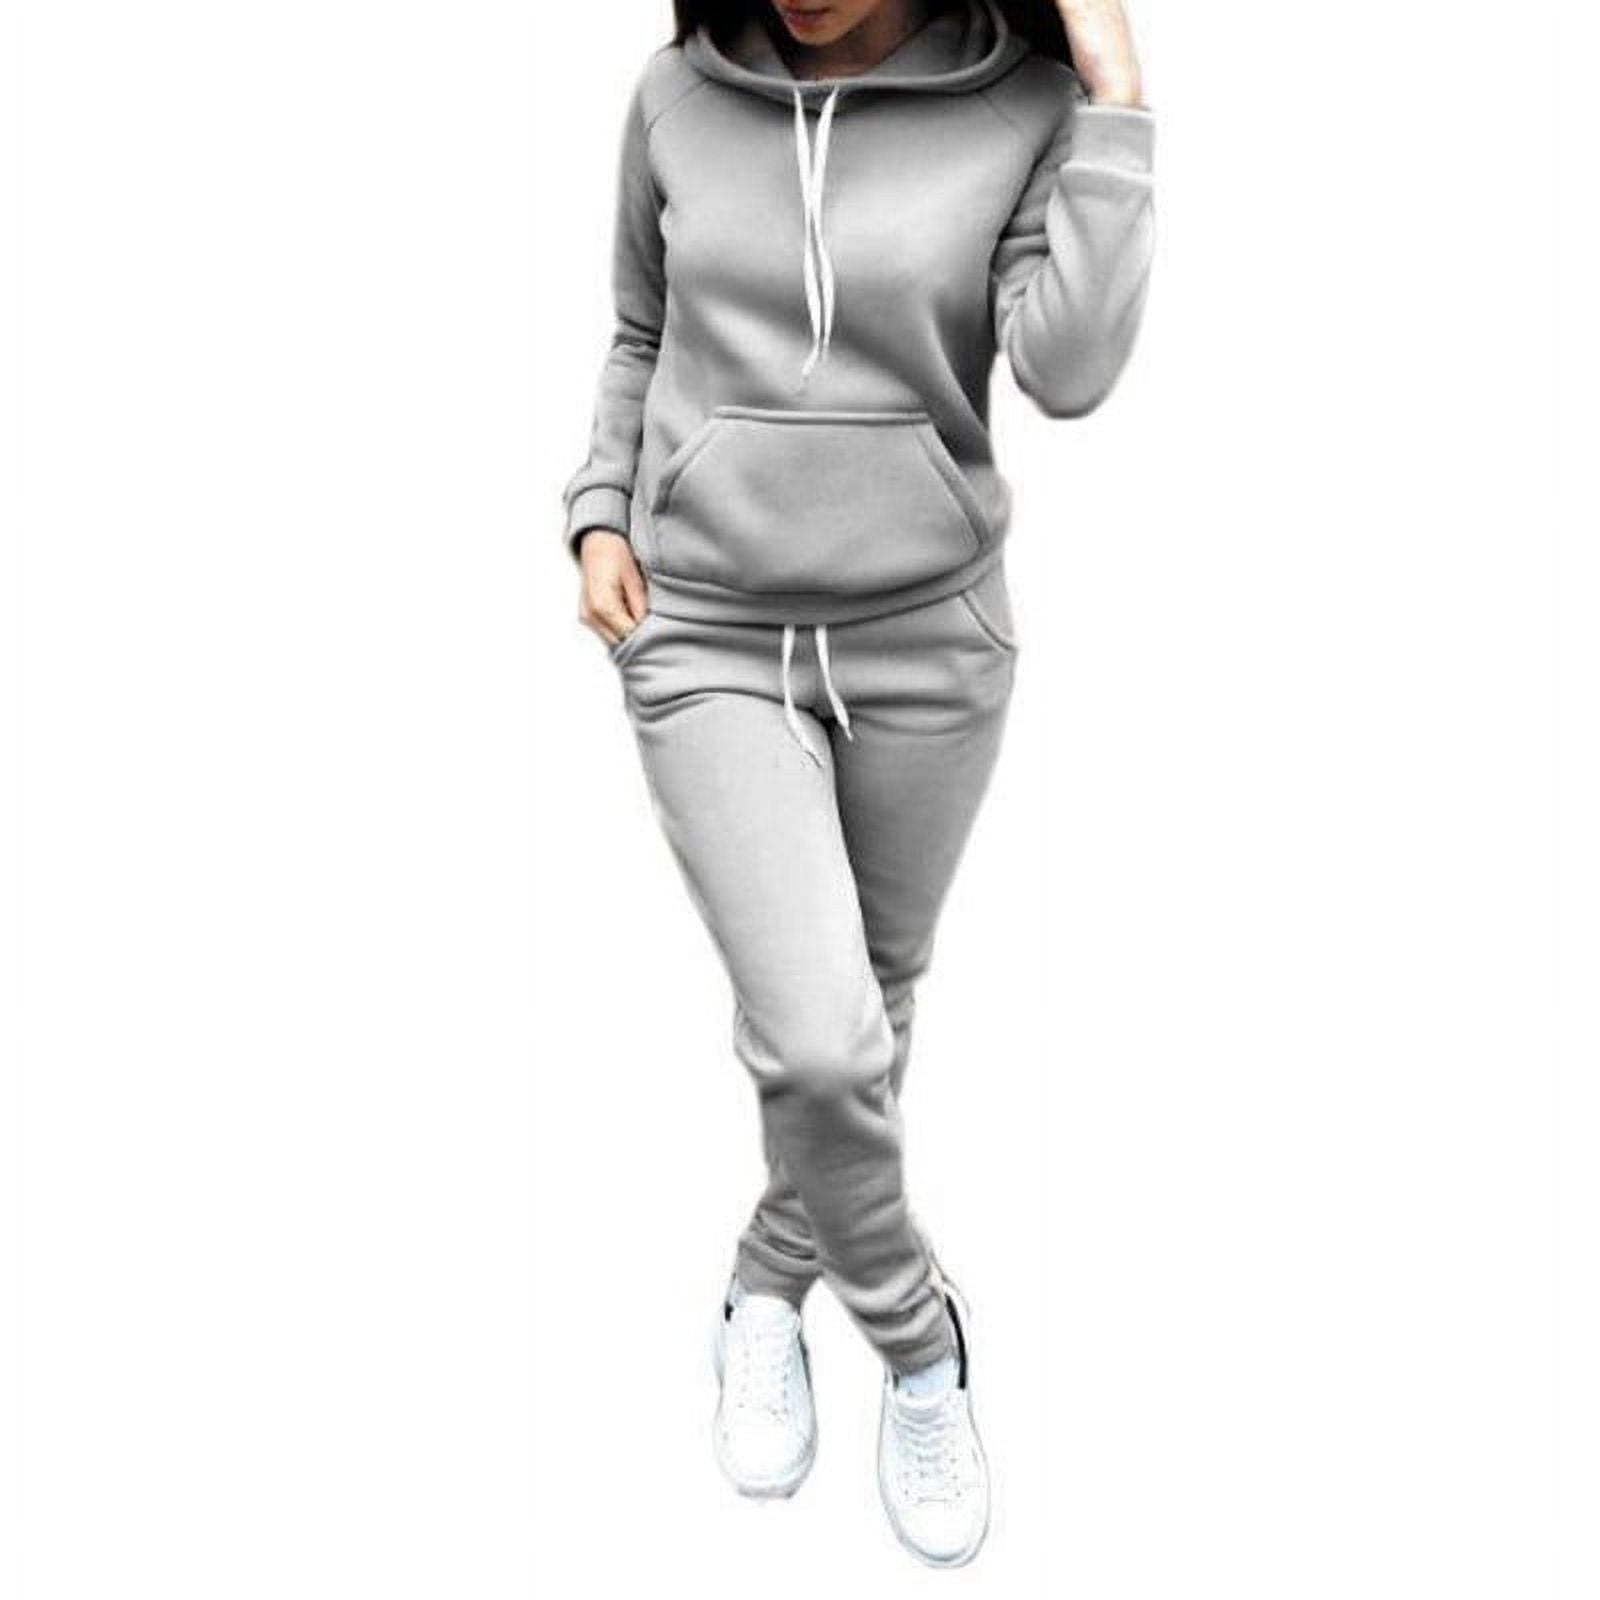 How to Style a Sweat Set (Two Body Types!) - Merrick's Art  Sweat suits  outfits, Sweatsuit outfits women, How to look classy